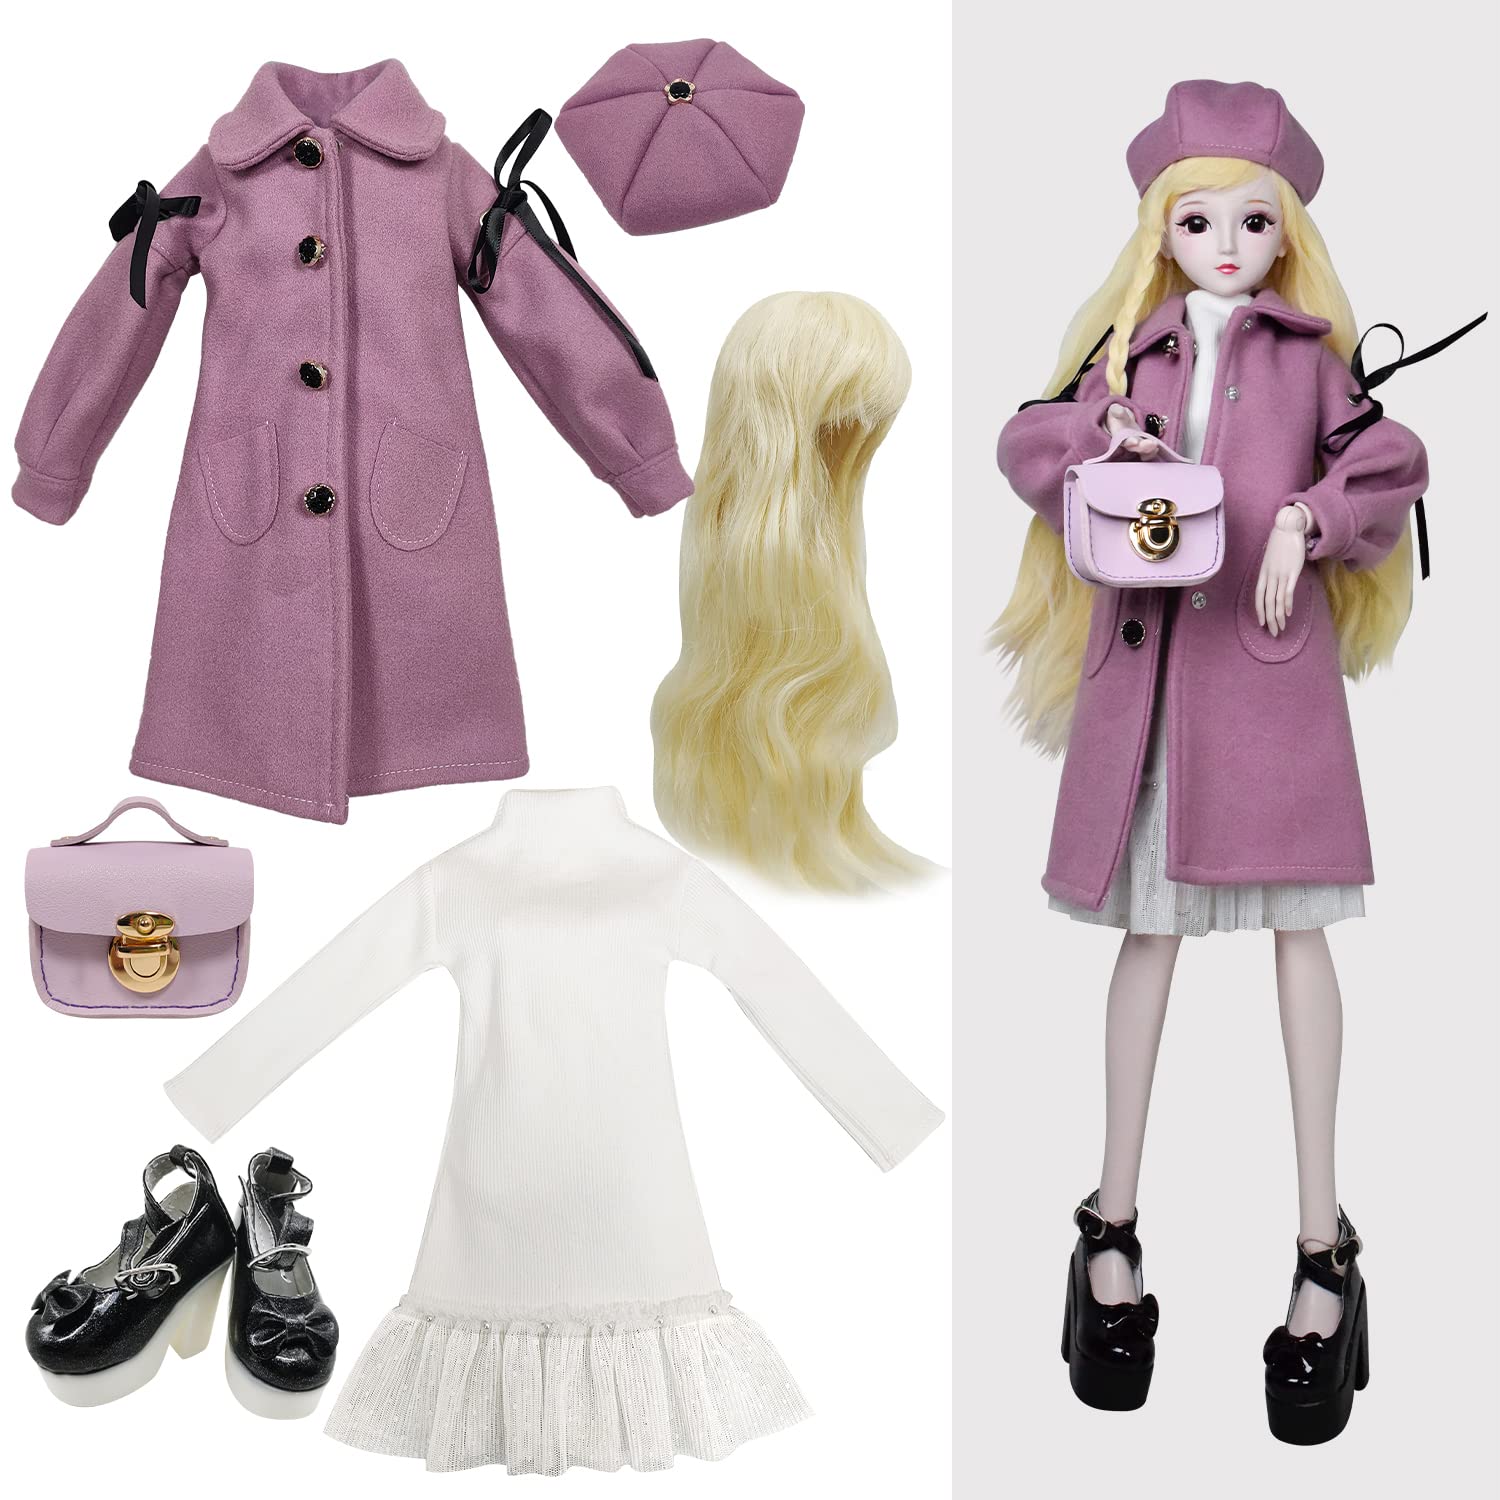 Proudoll 1/3 BJD Doll Clothes 60cm 24in SD Ball Jointed Dolls Accessories Set Beret Wig Dress Coat Handbag High Heel